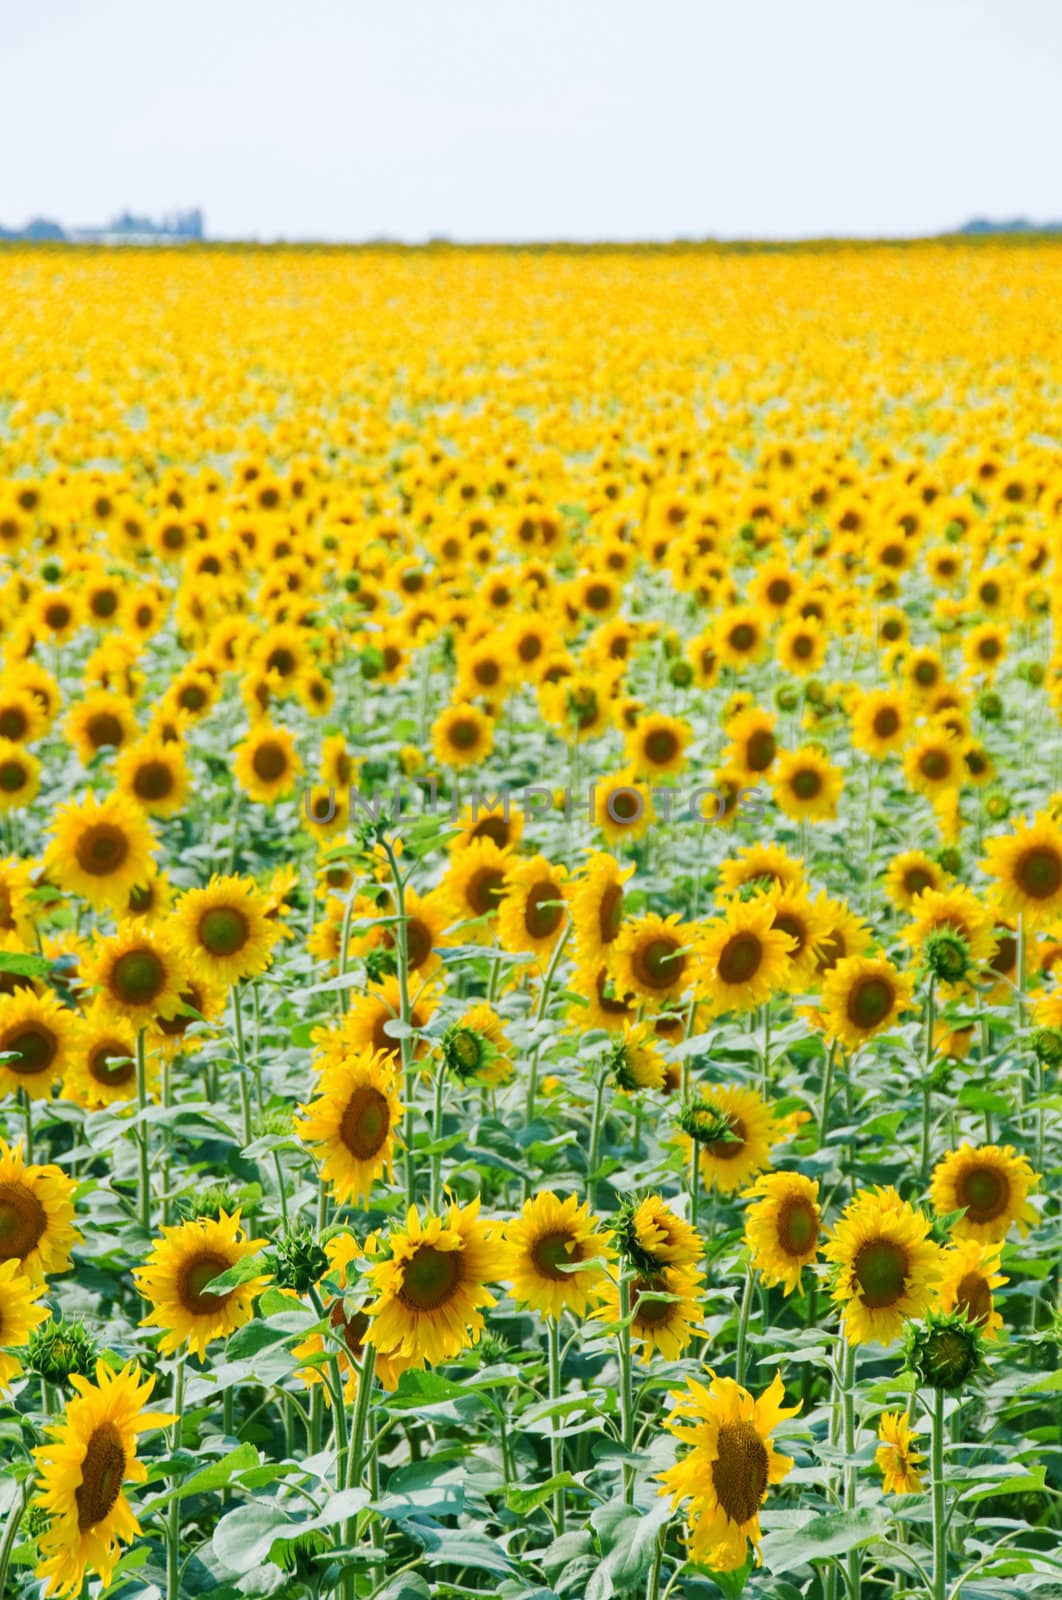 Sunflowers field with huge number of flowers with clear sky above